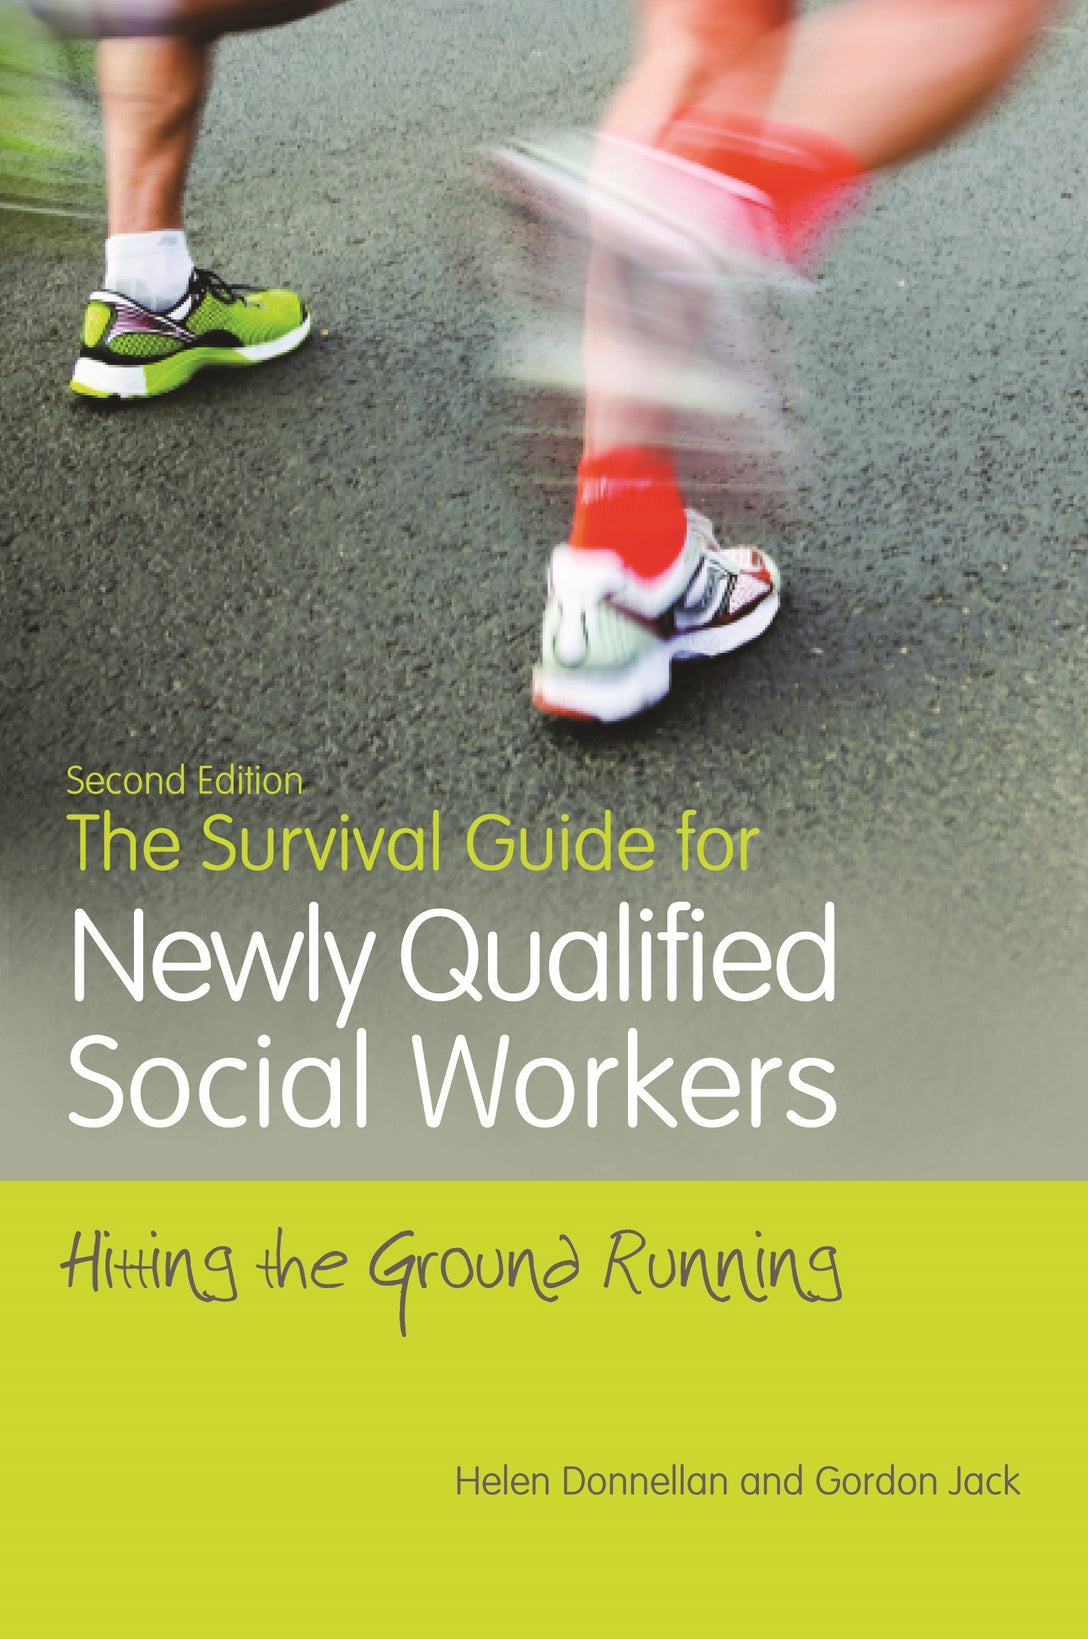 The Survival Guide for Newly Qualified Social Workers, Second Edition by Helen Donnellan, Gordon Jack